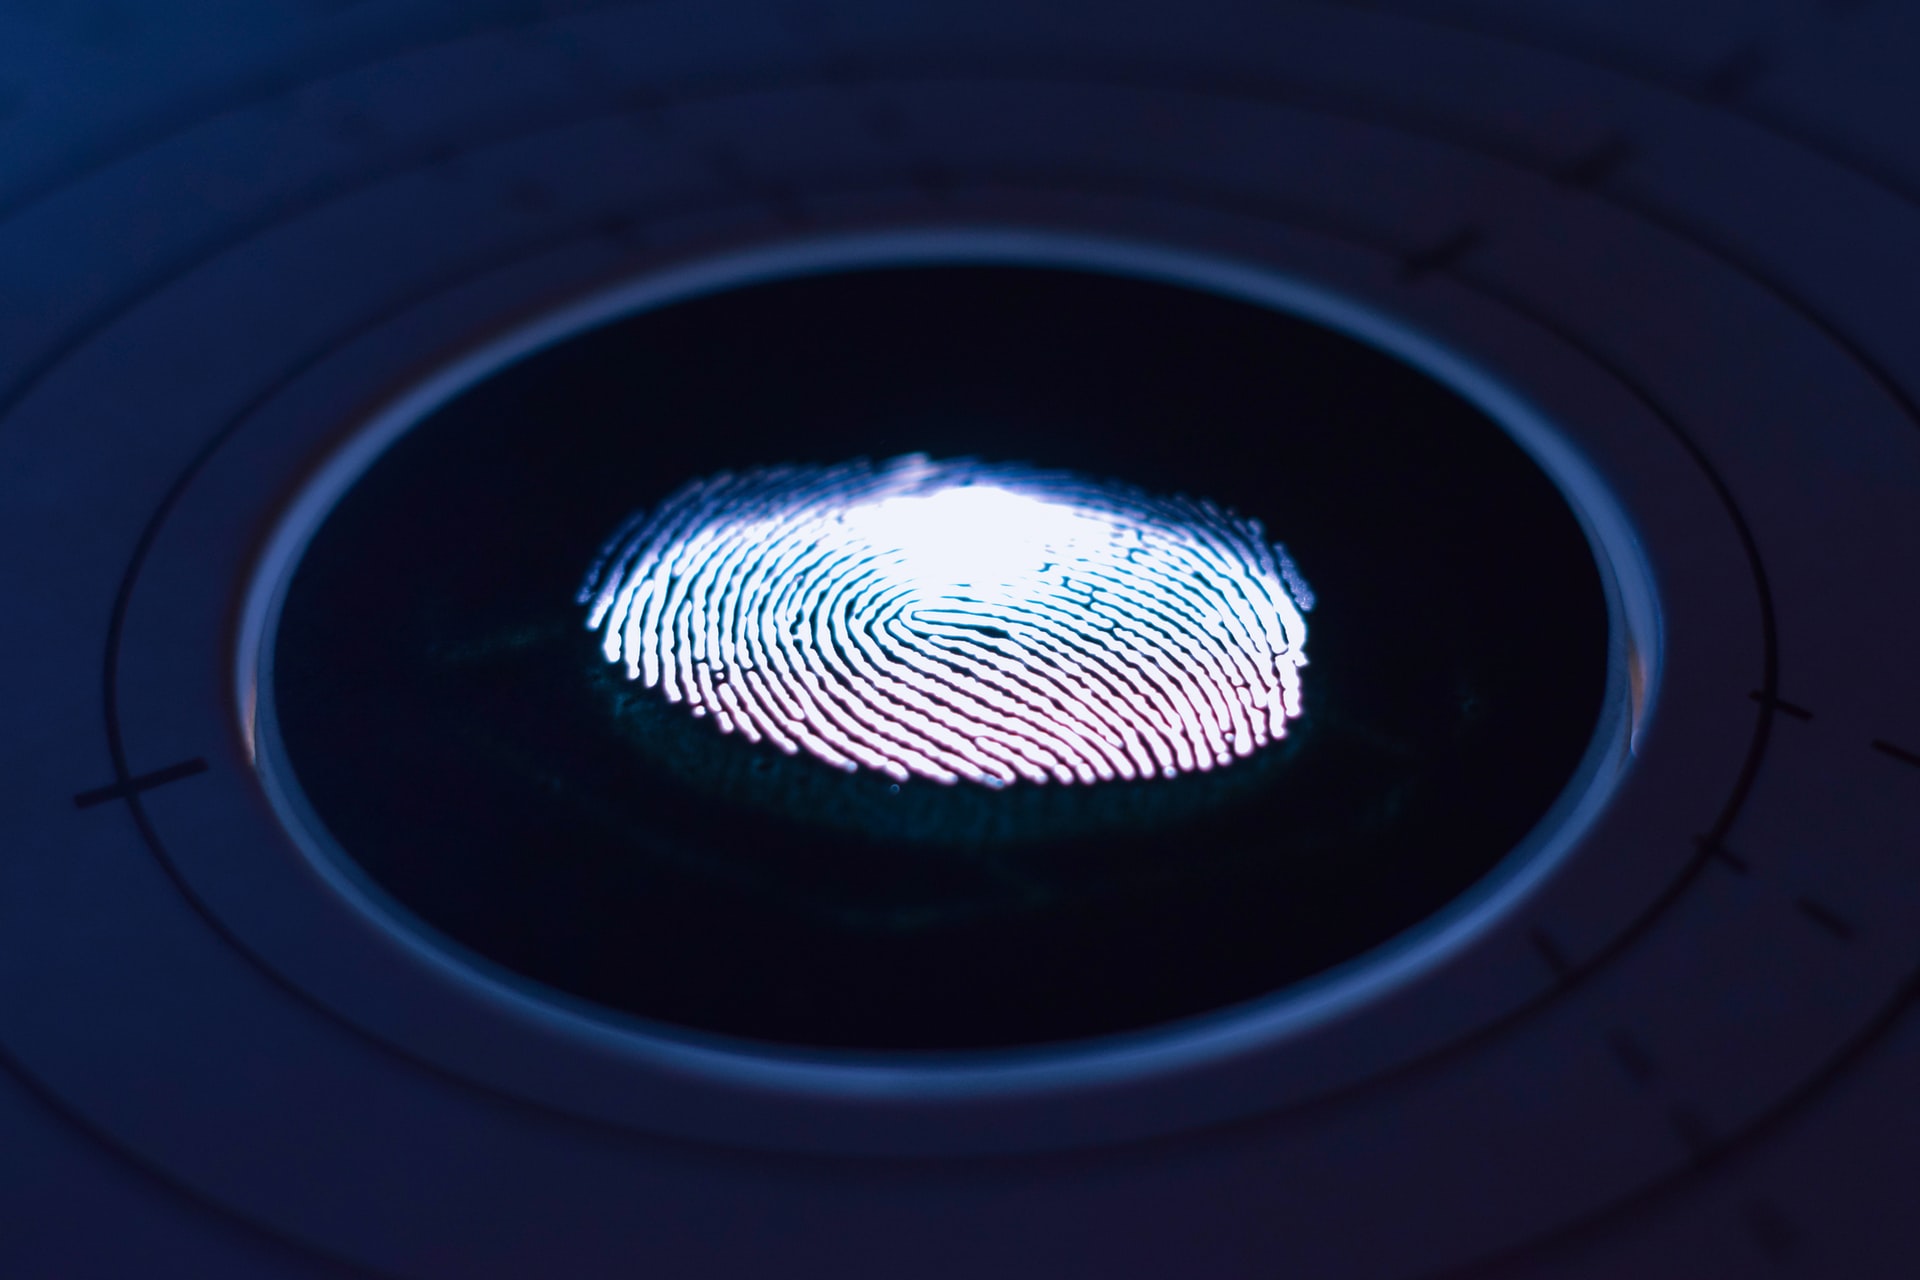 A neon fingerprint, representing a pause on the requirement for biometrics for those applying for immigration status within Canada